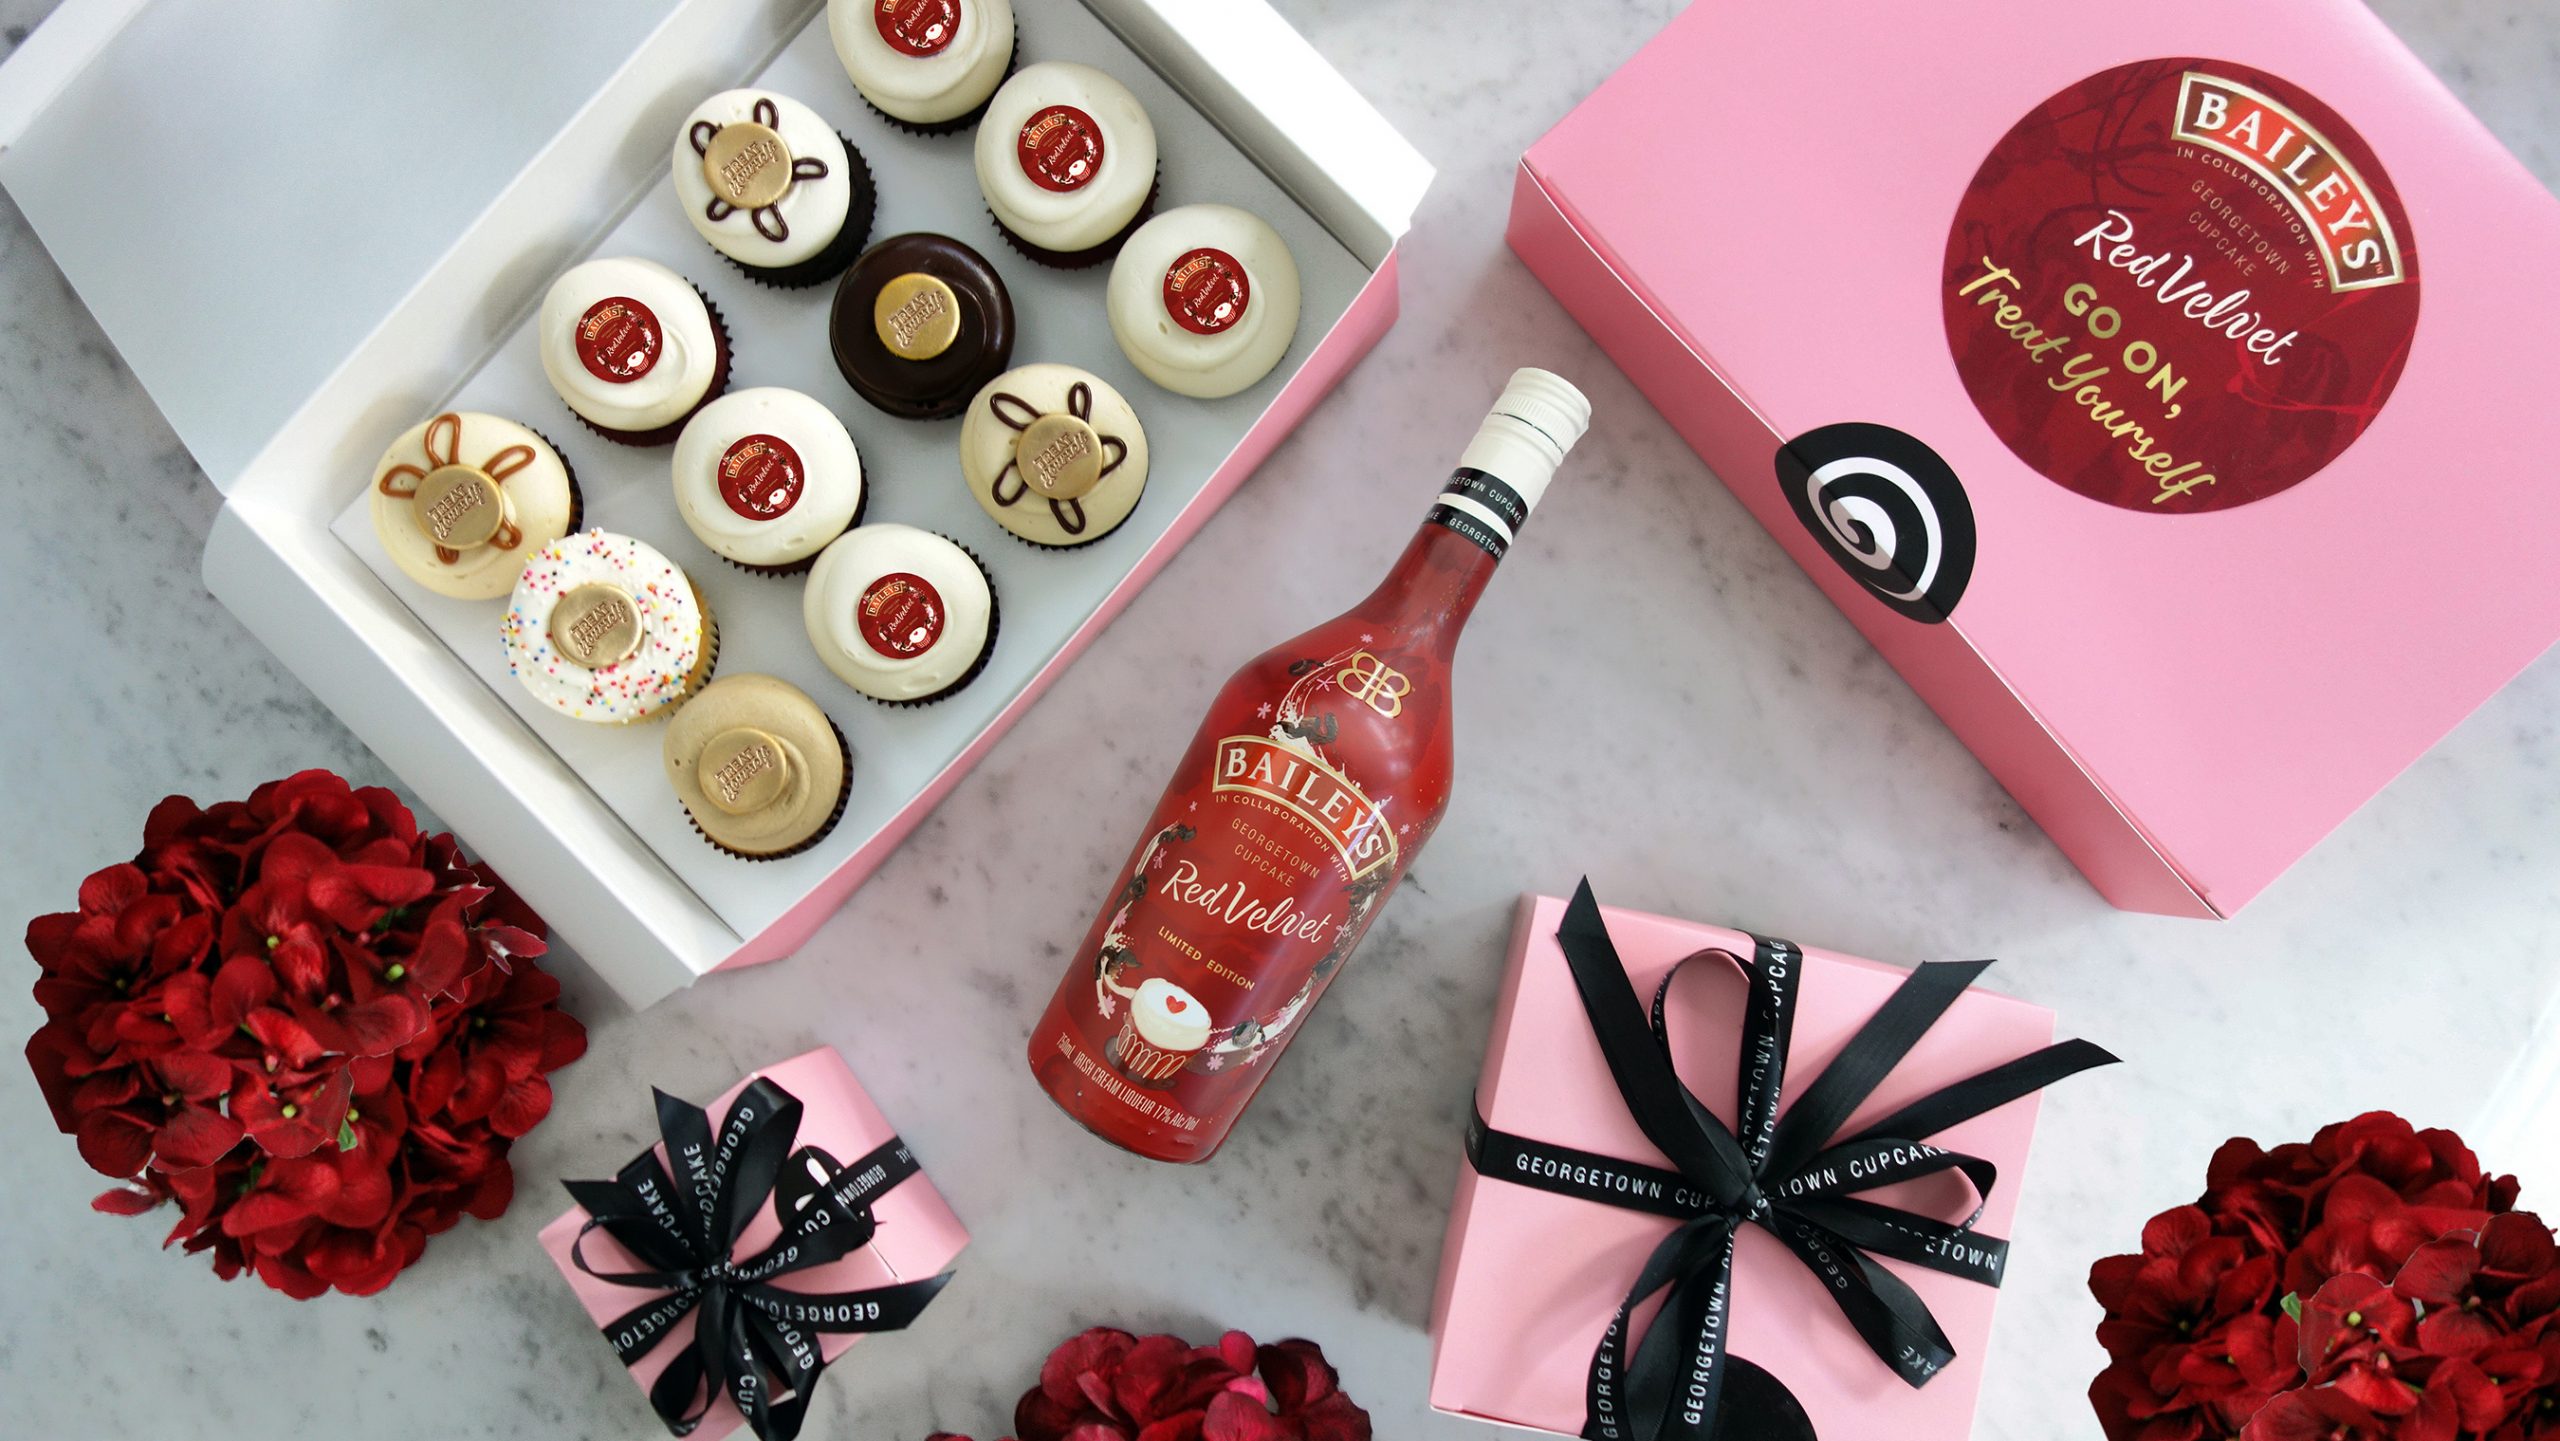 Baileys Red Velvet Liqueur with Georgetown Cupcakes